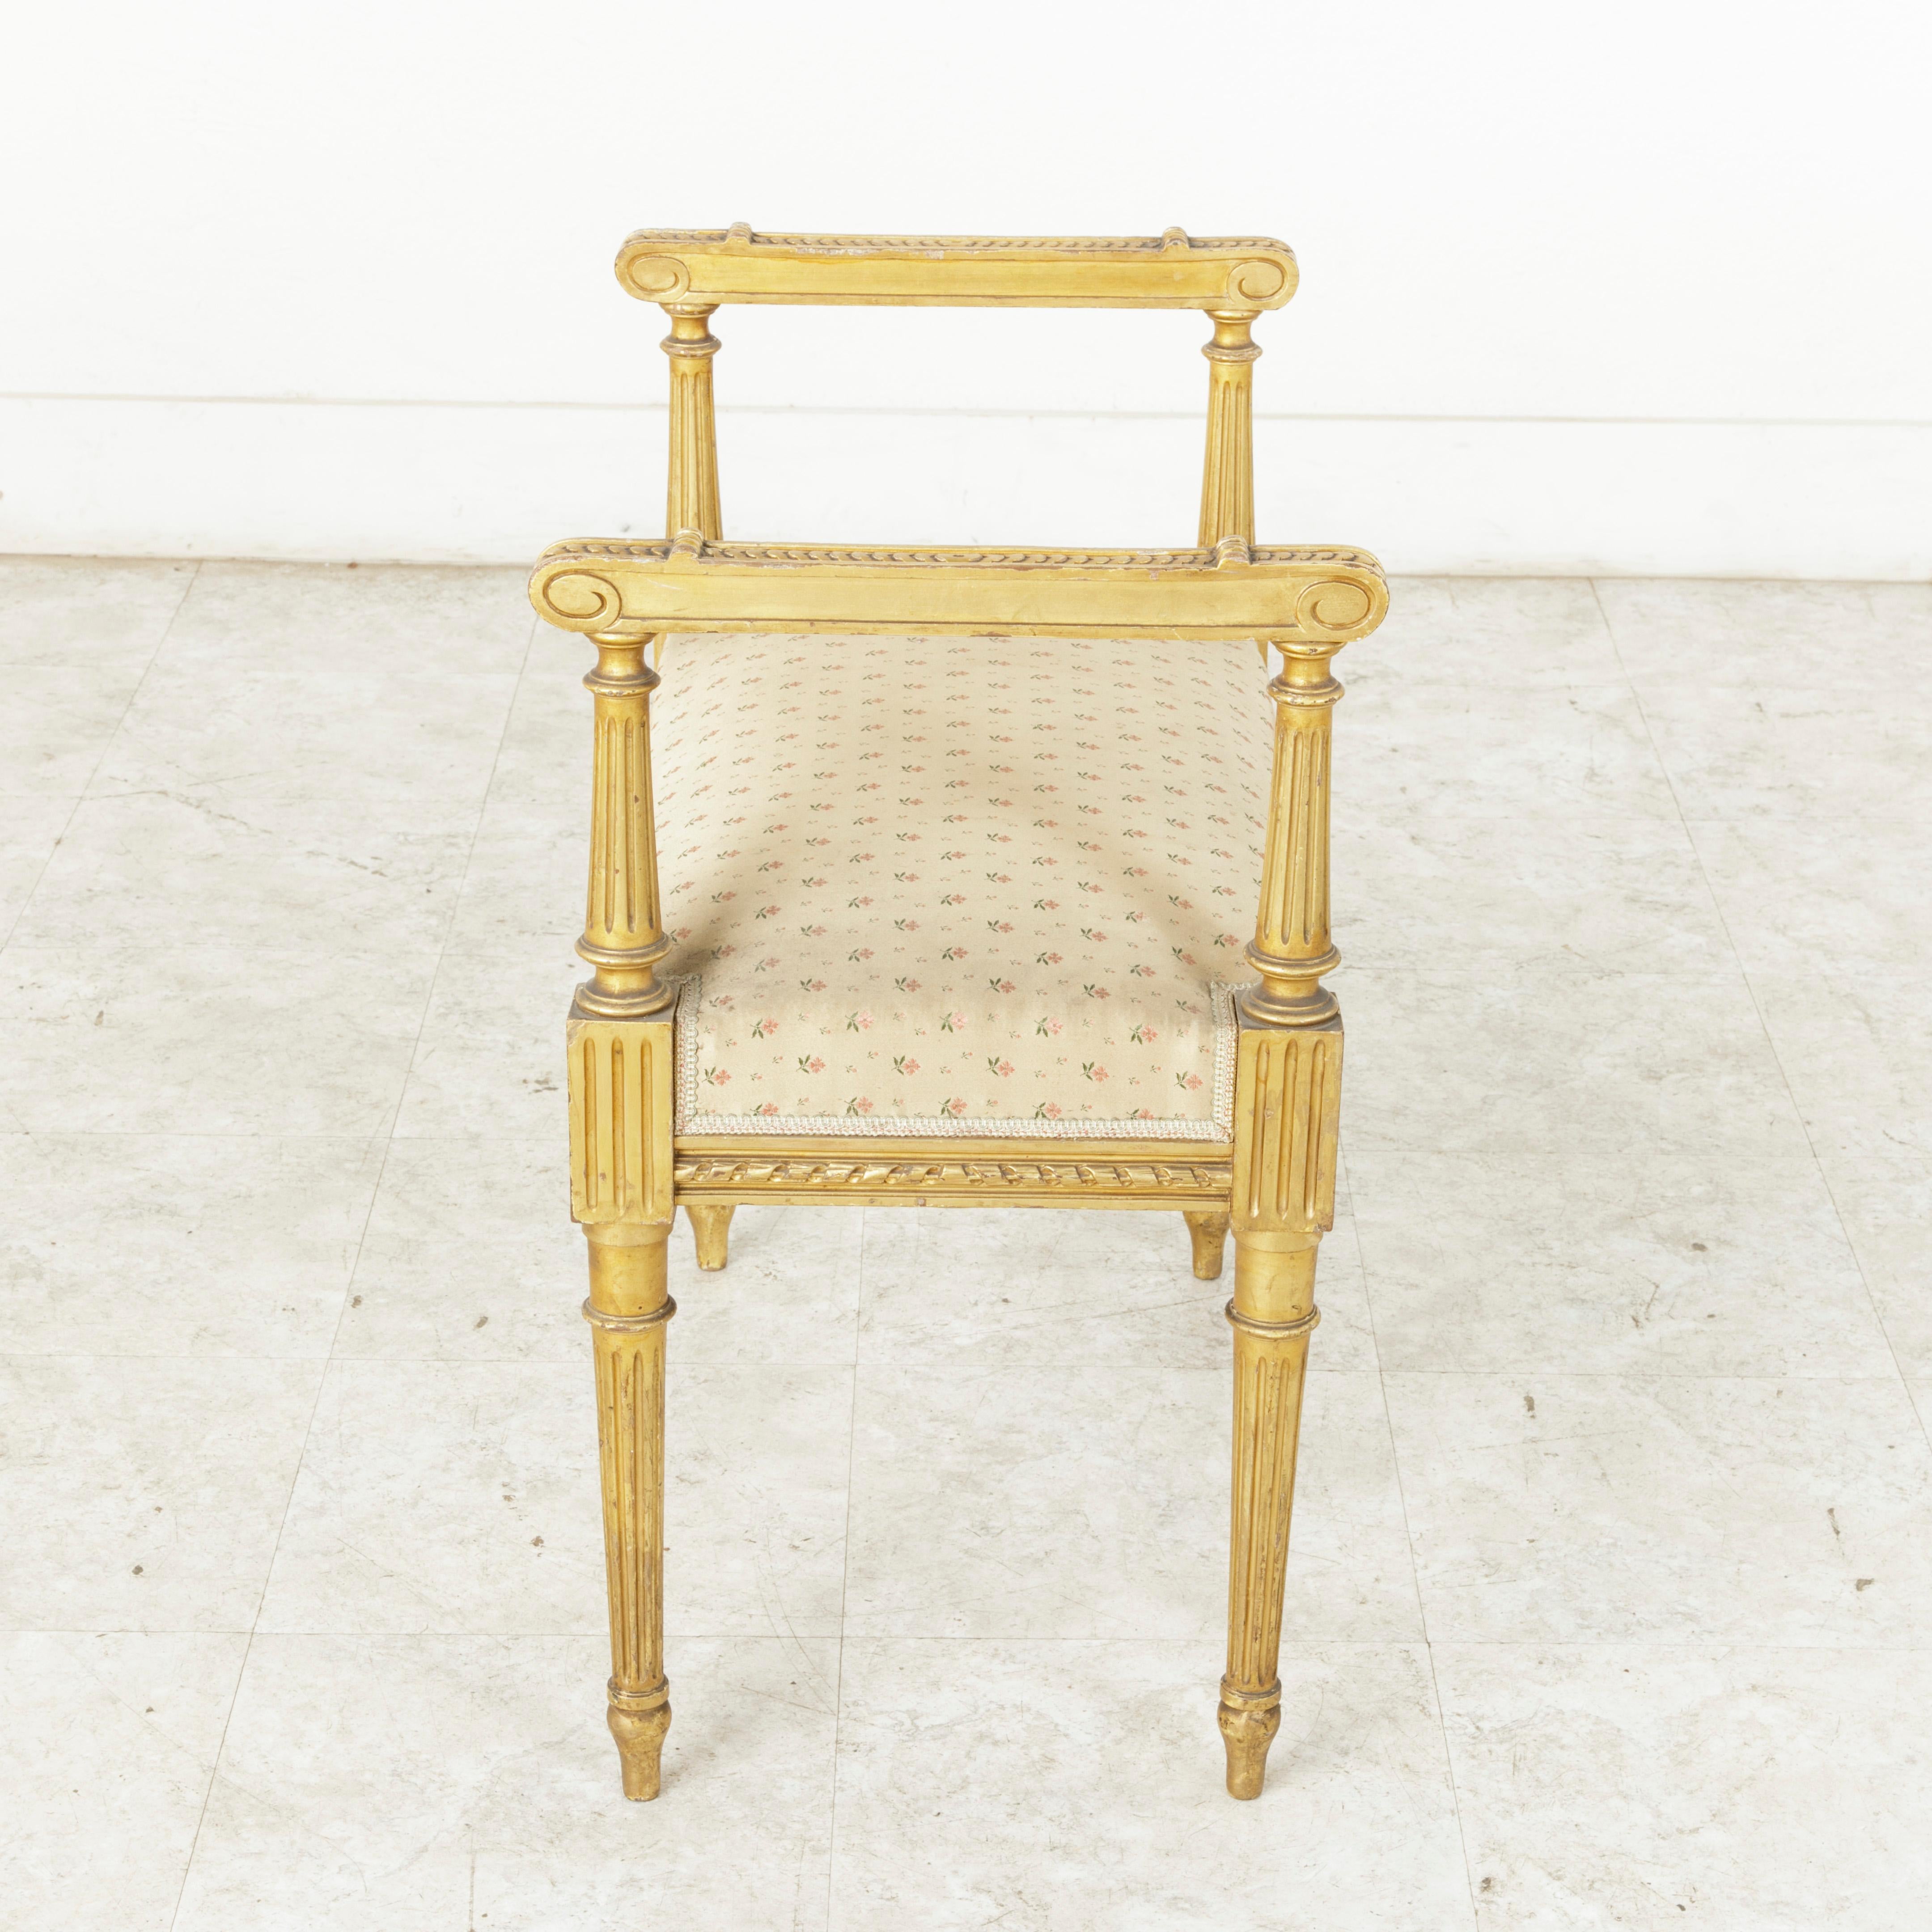 Upholstery Early 20th Century French Louis XVI Style Giltwood Banquette Vanity Stool Bench